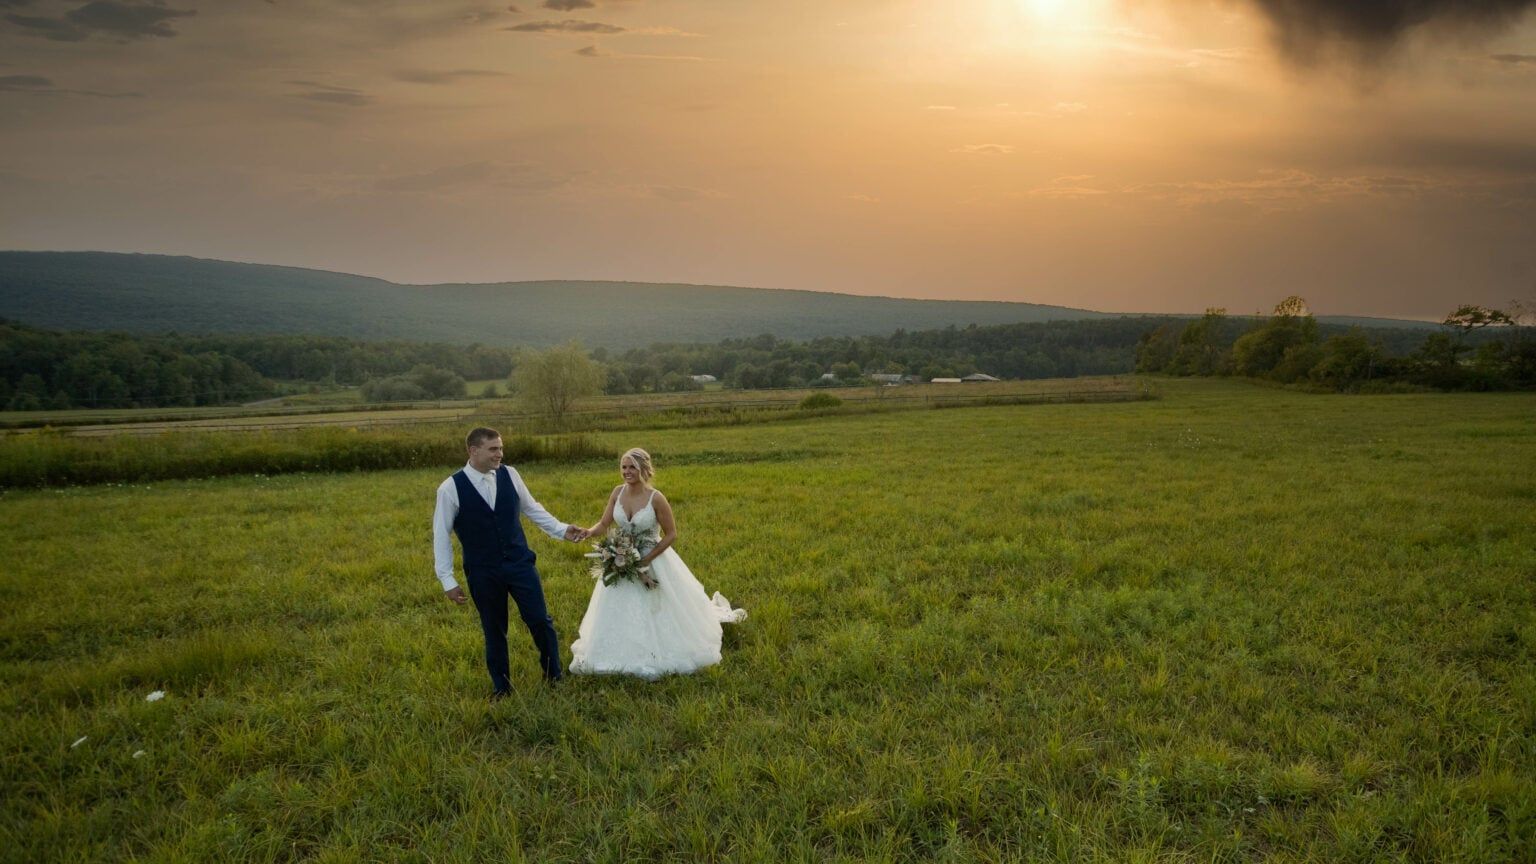 A bride and groom are walking through a grassy field at sunset.